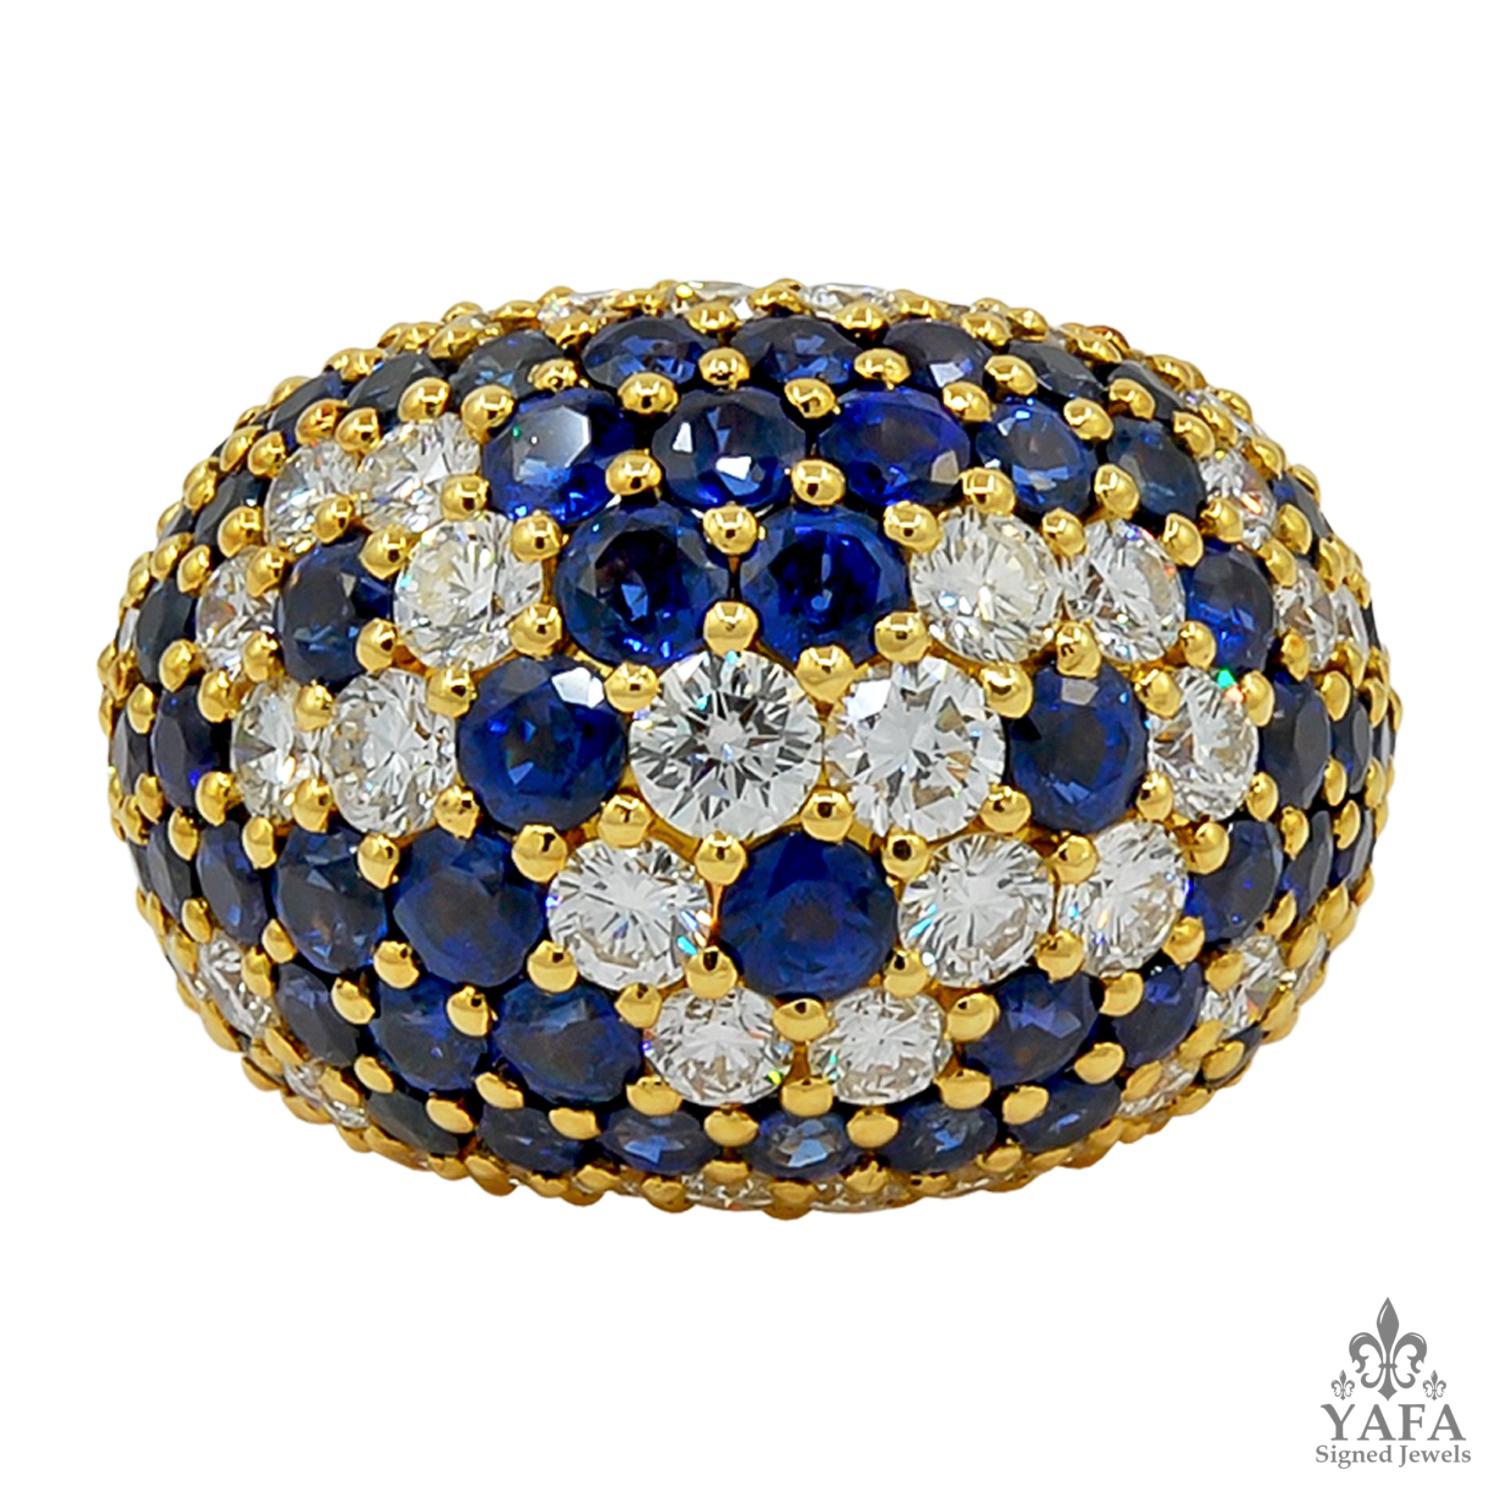 Van Cleef & Arpels Vintage Diamond Sapphire Ring
An 18k yellow gold dome ring, set with circular-cut diamonds and sapphire, signed Van Cleef & Arpels, French.
ring size – 6
Signed “VAN CLEEF & ARPELS”; circa 1970s
